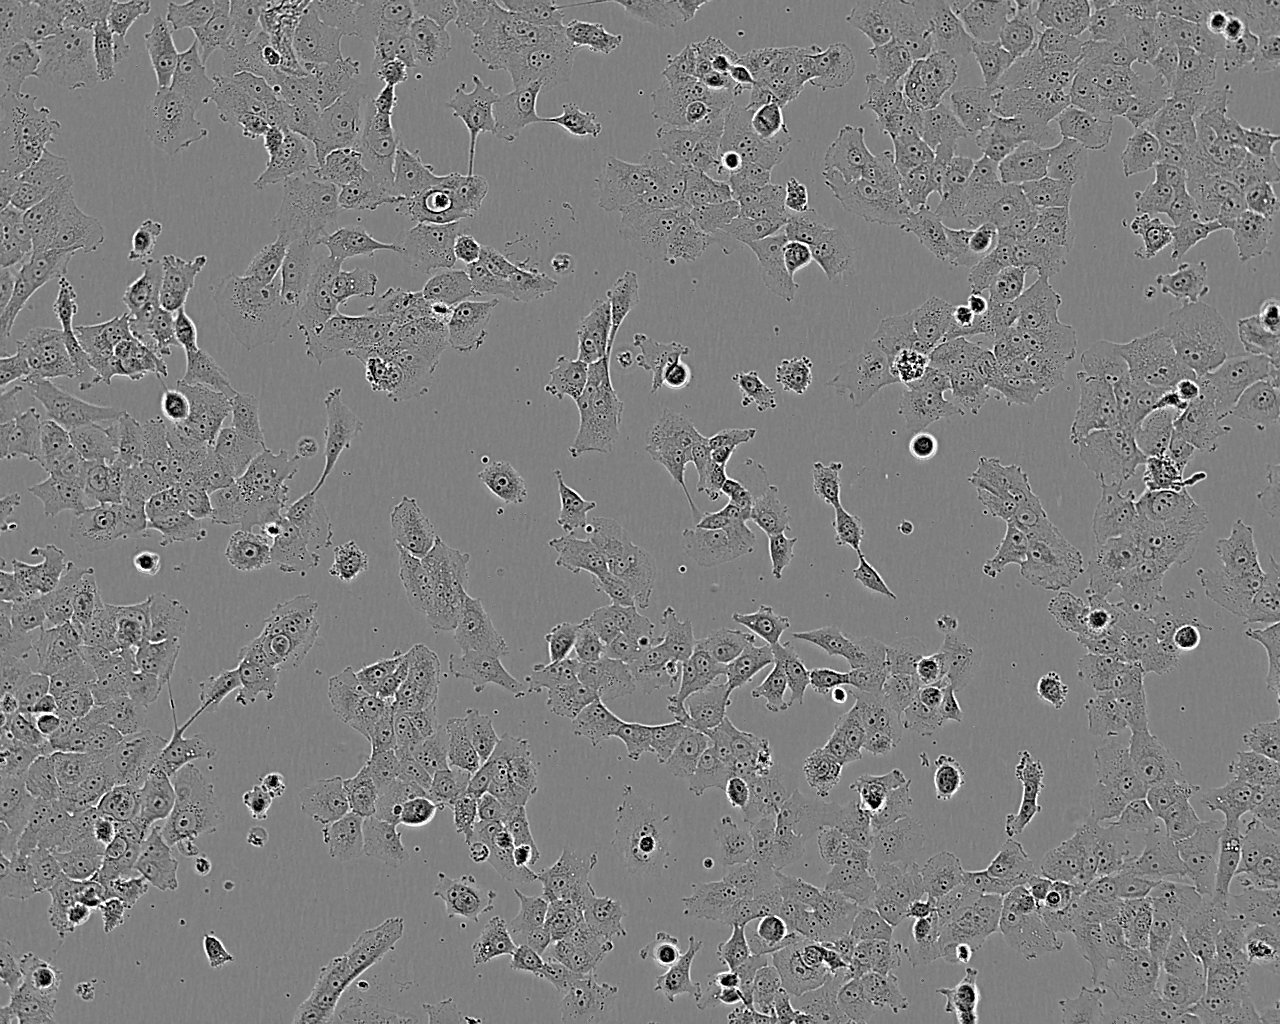 G-401 epithelioid cells人肾癌Wilms细胞系,G-401 epithelioid cells